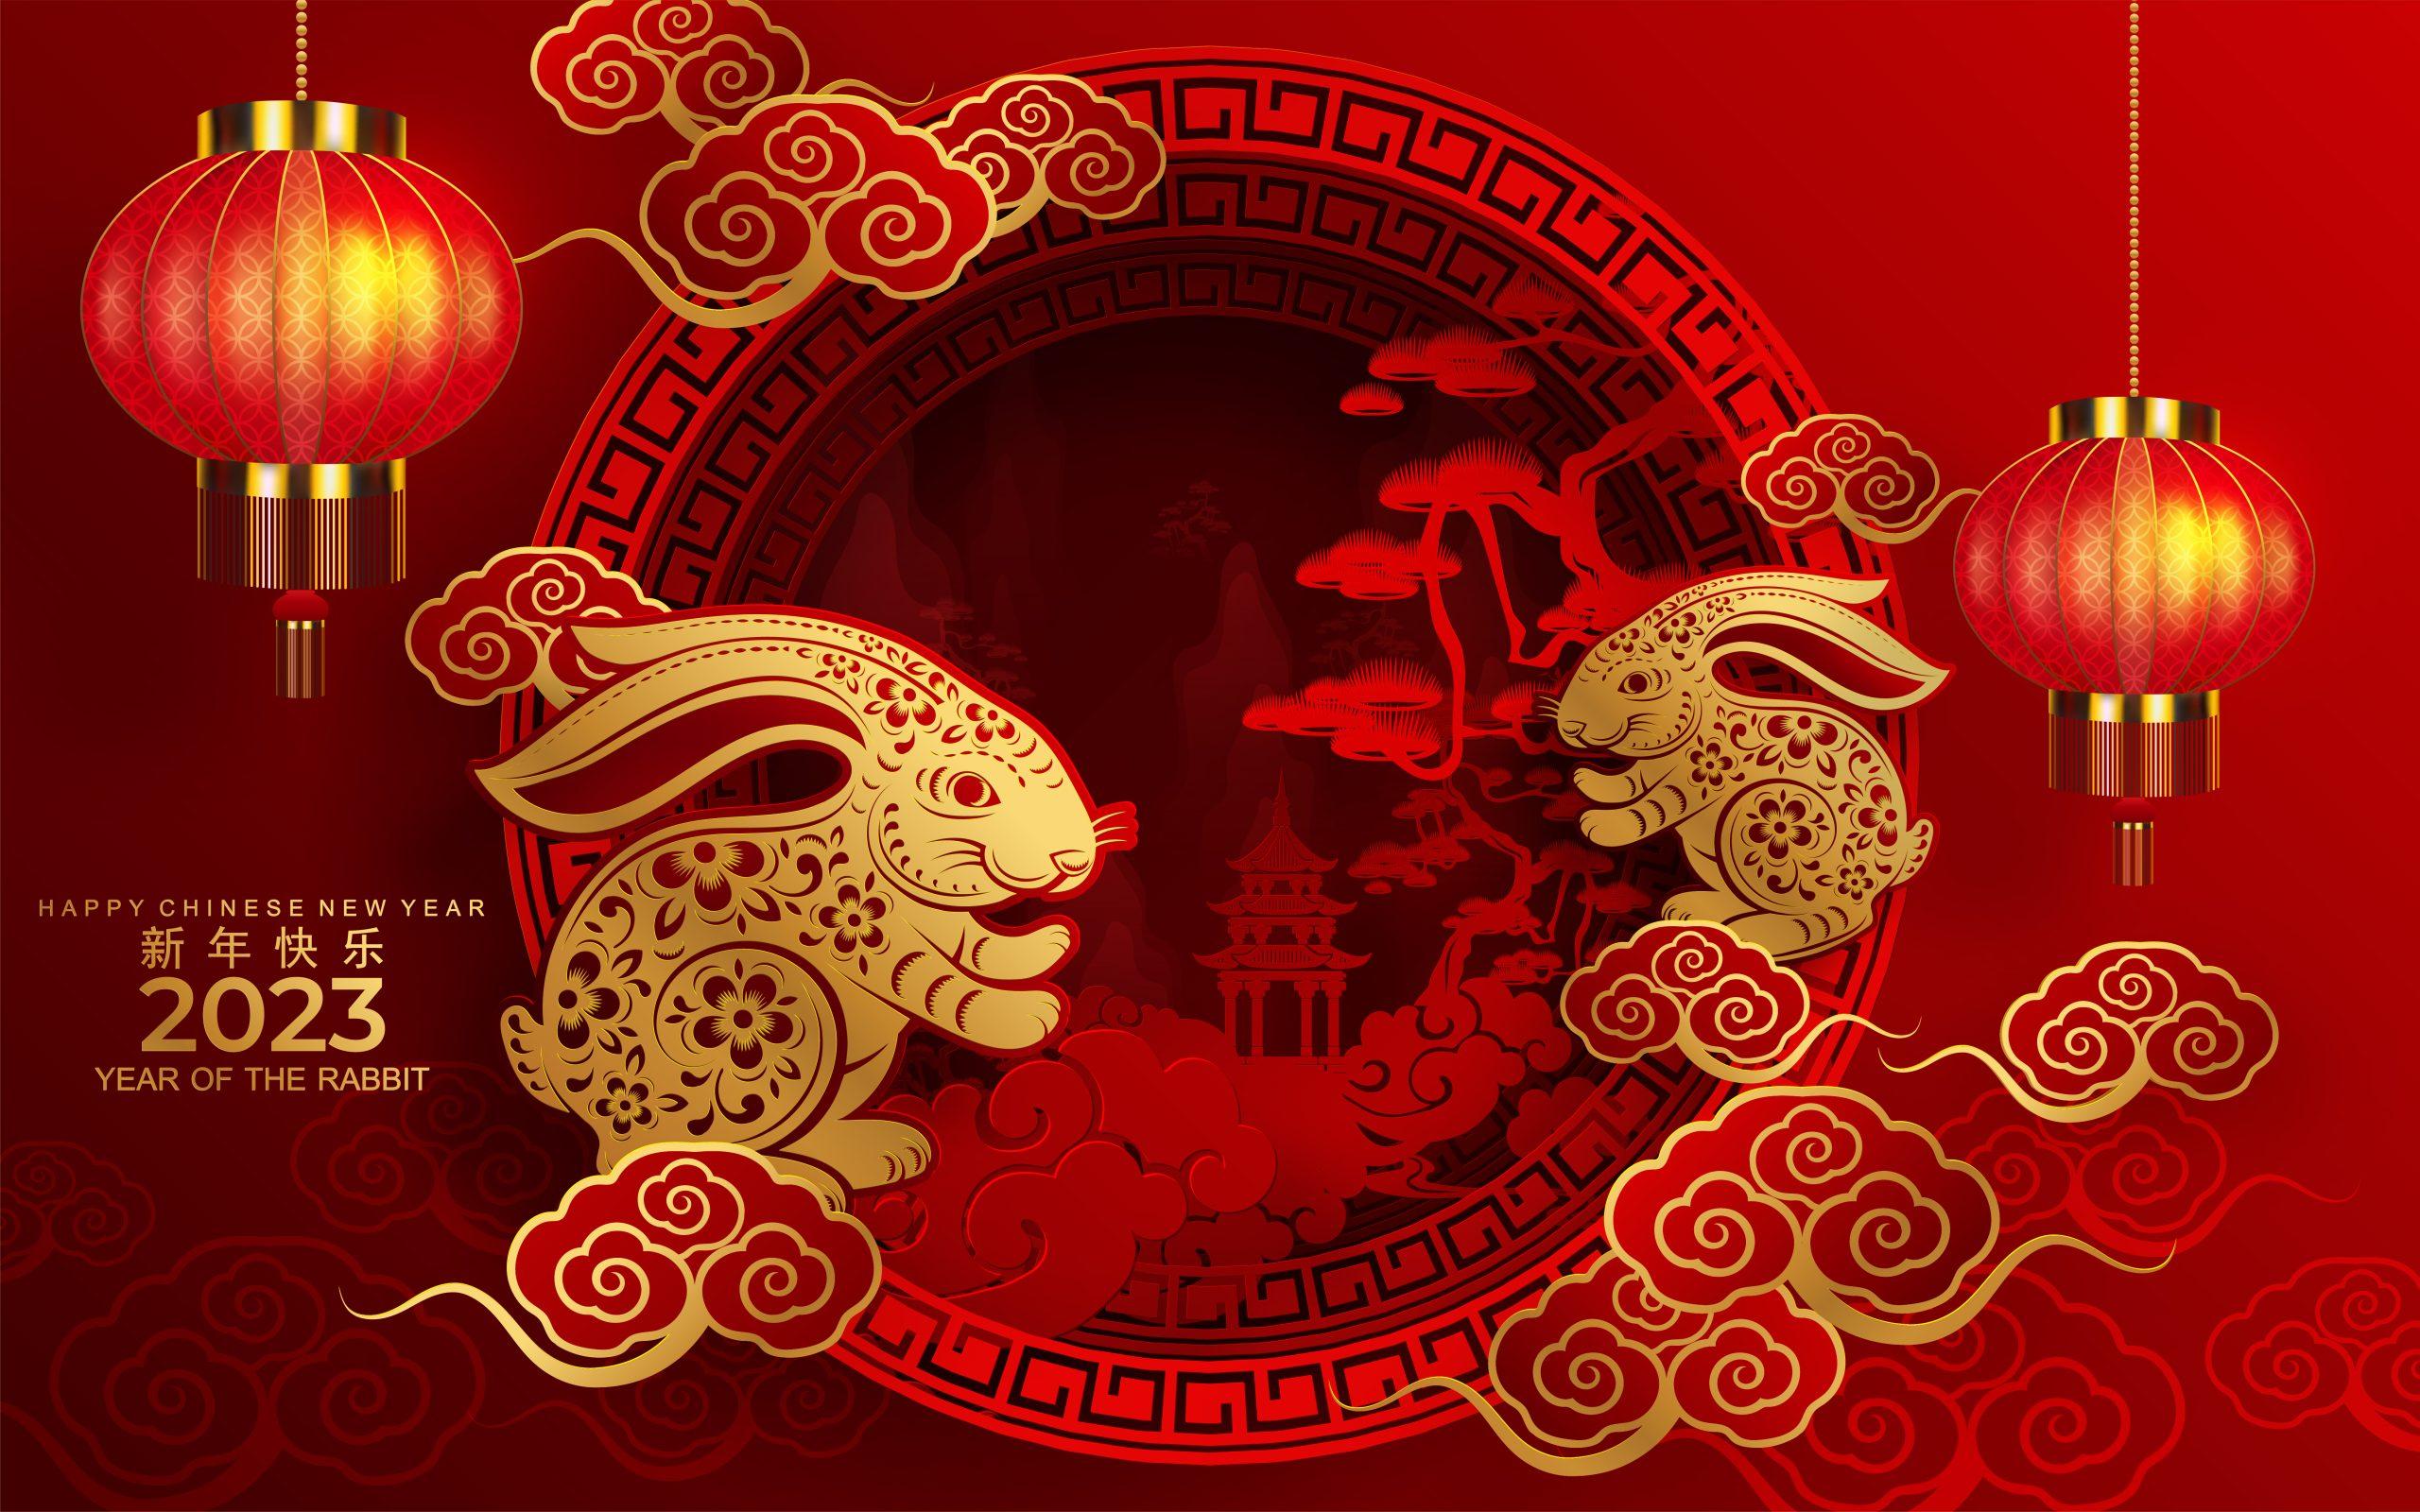 Chinese New Year 2023 Stock Photos Images and Backgrounds for Free Download